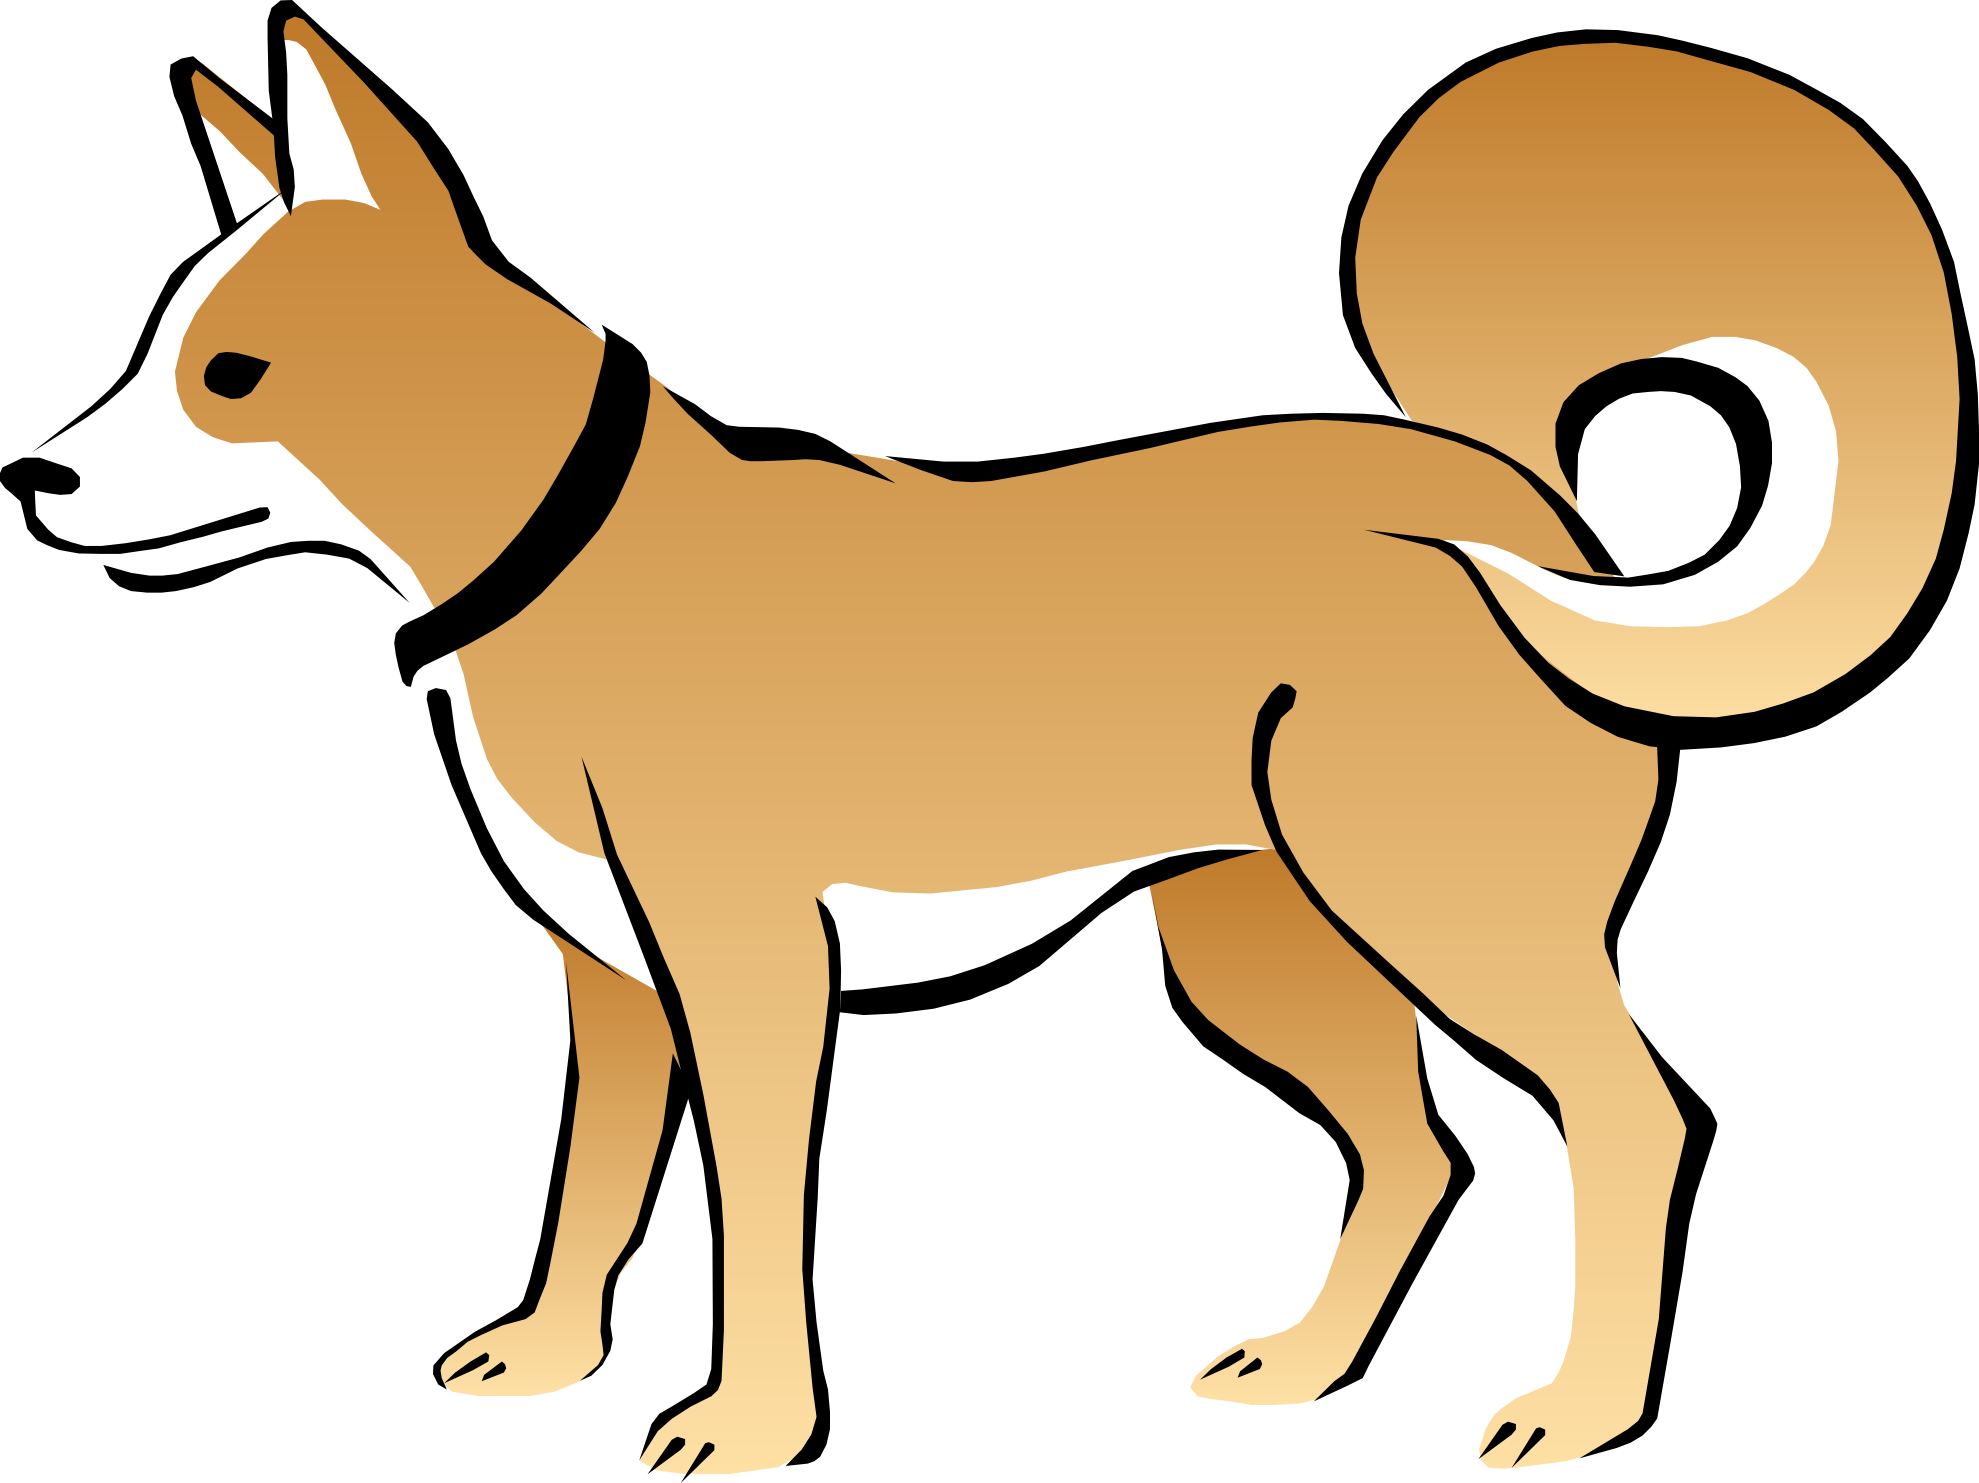 Puppy Running Clipart | Clipart Panda - Free Clipart Images